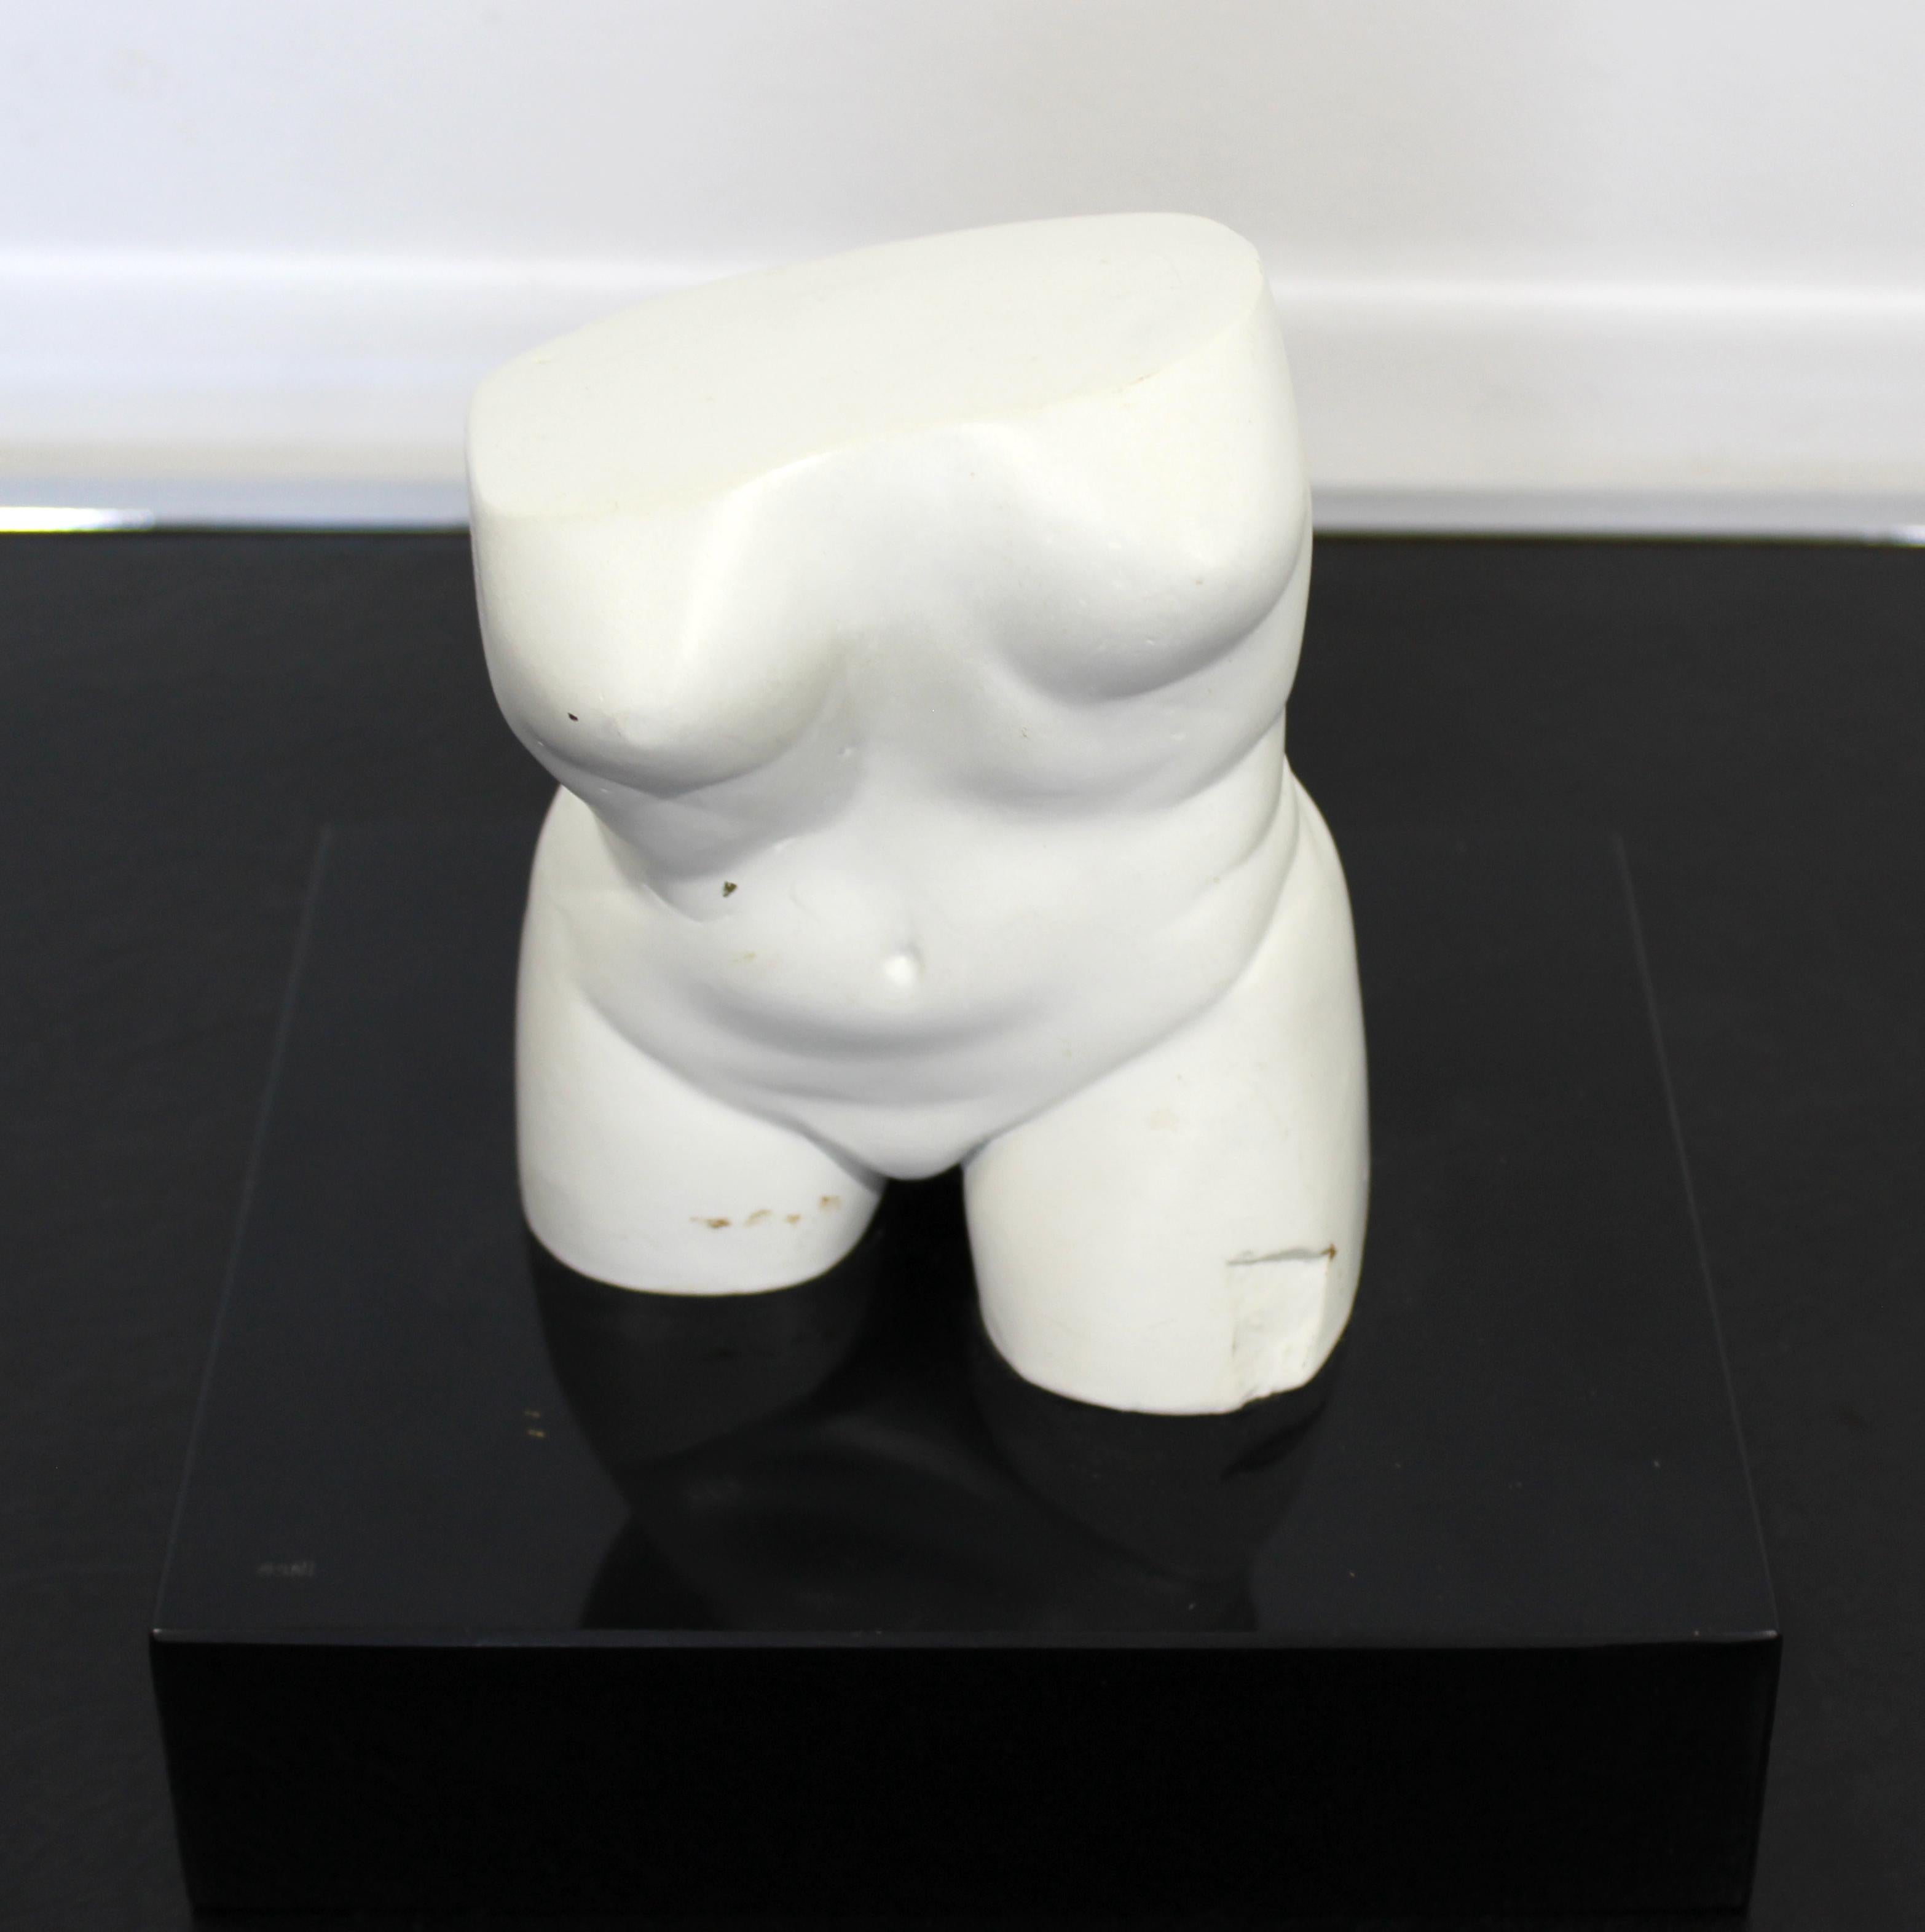 For your consideration is marvelous modern white torso sculpture titled 